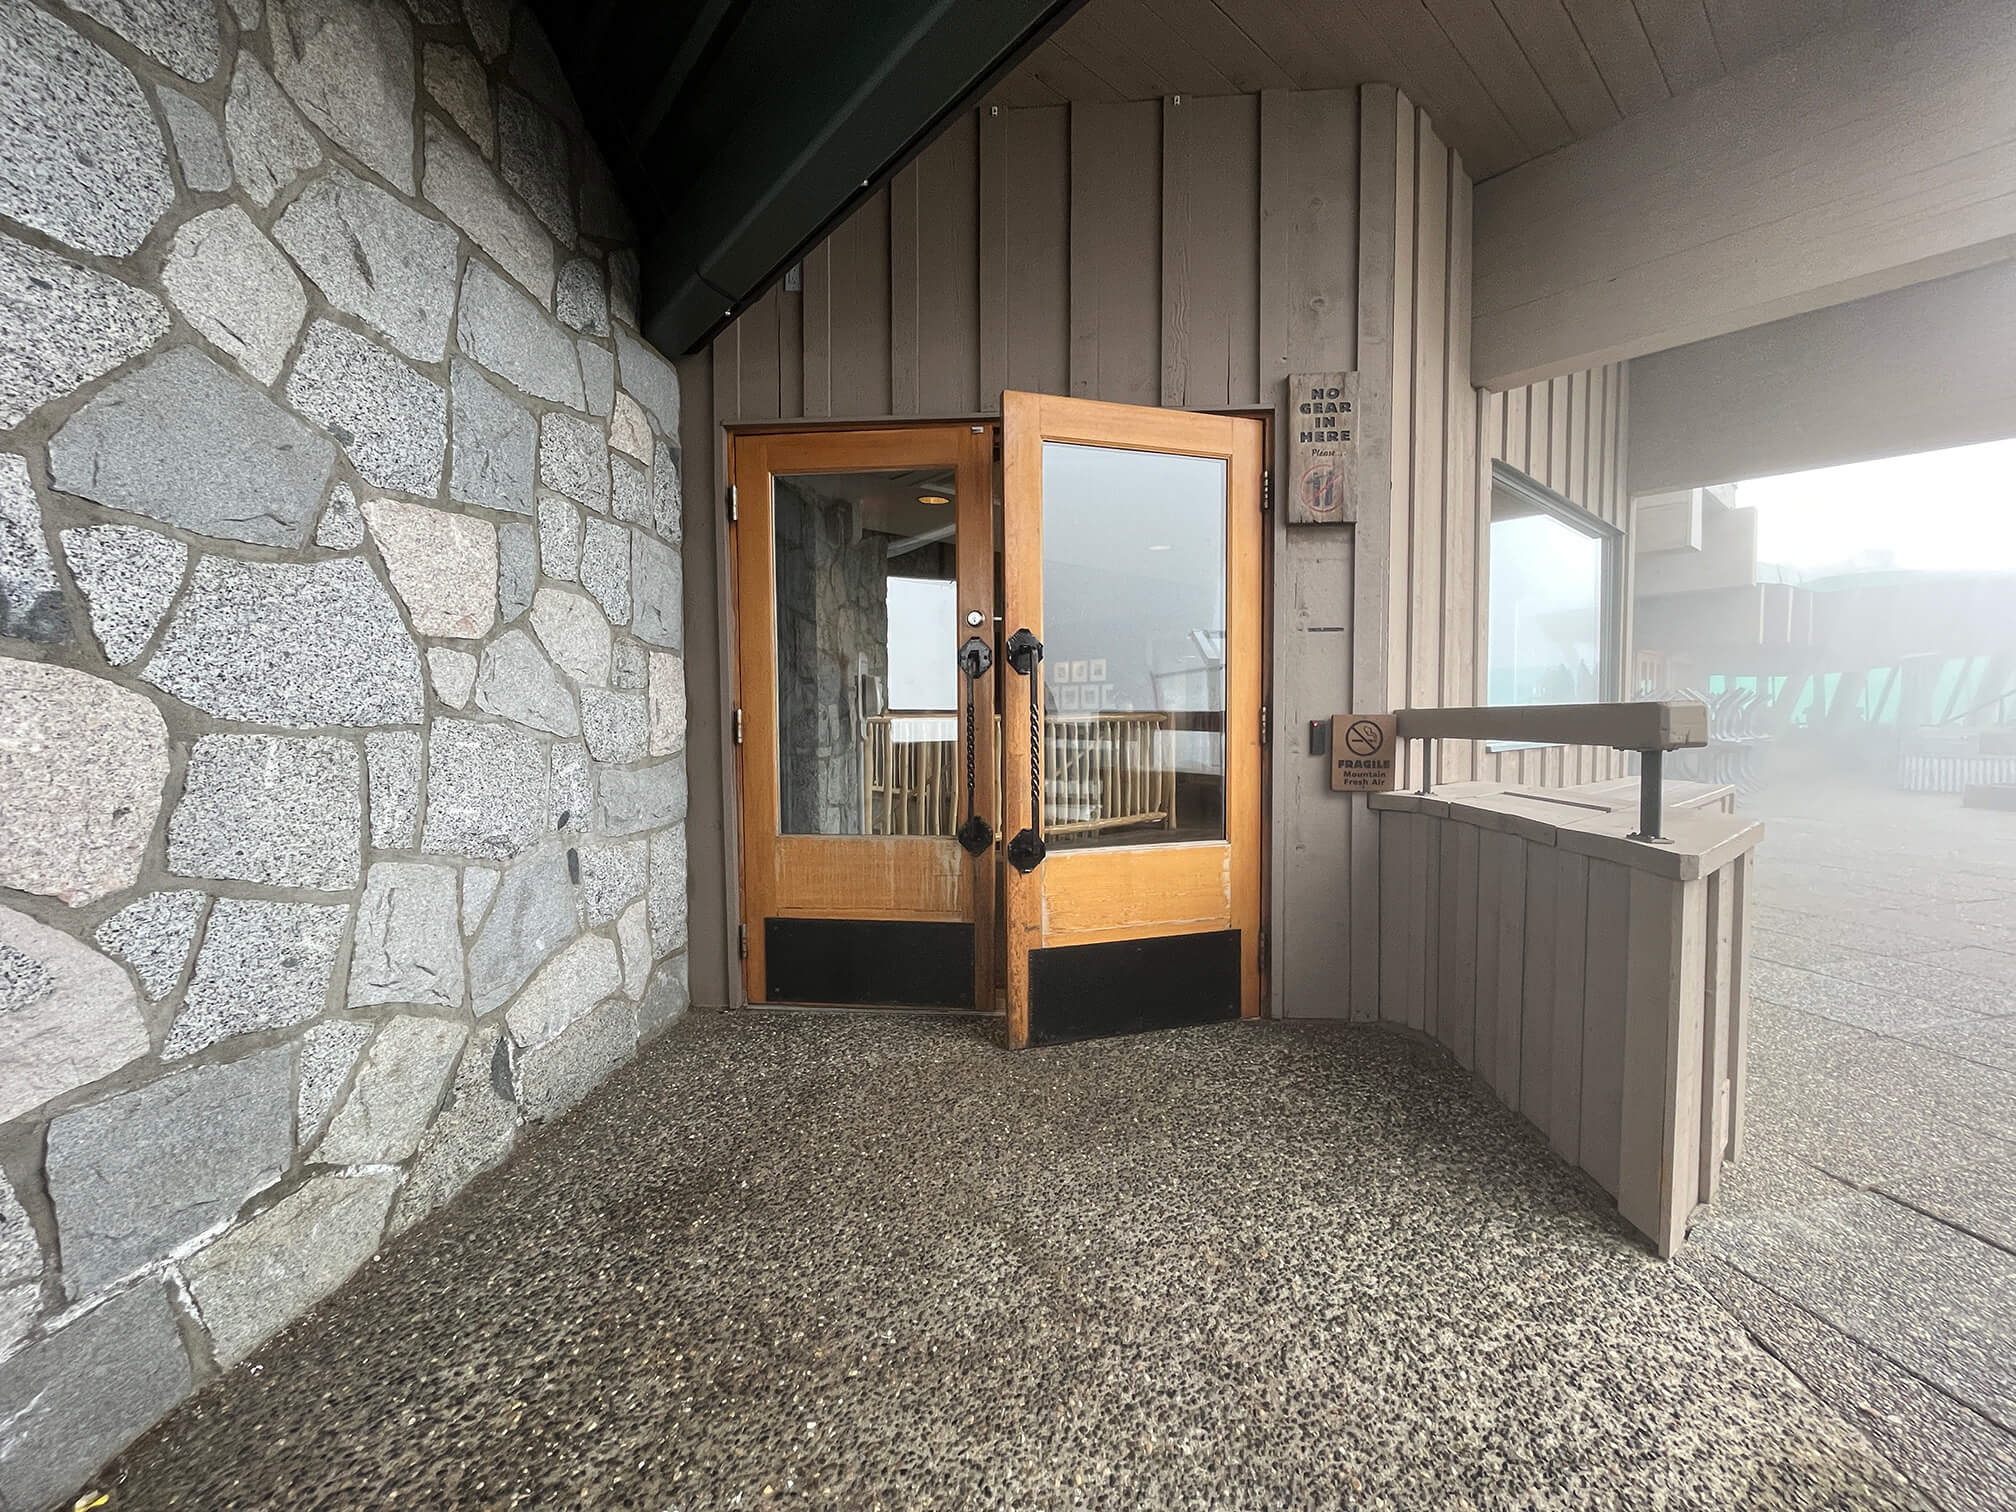 Entry door to the second floor of the lodge.